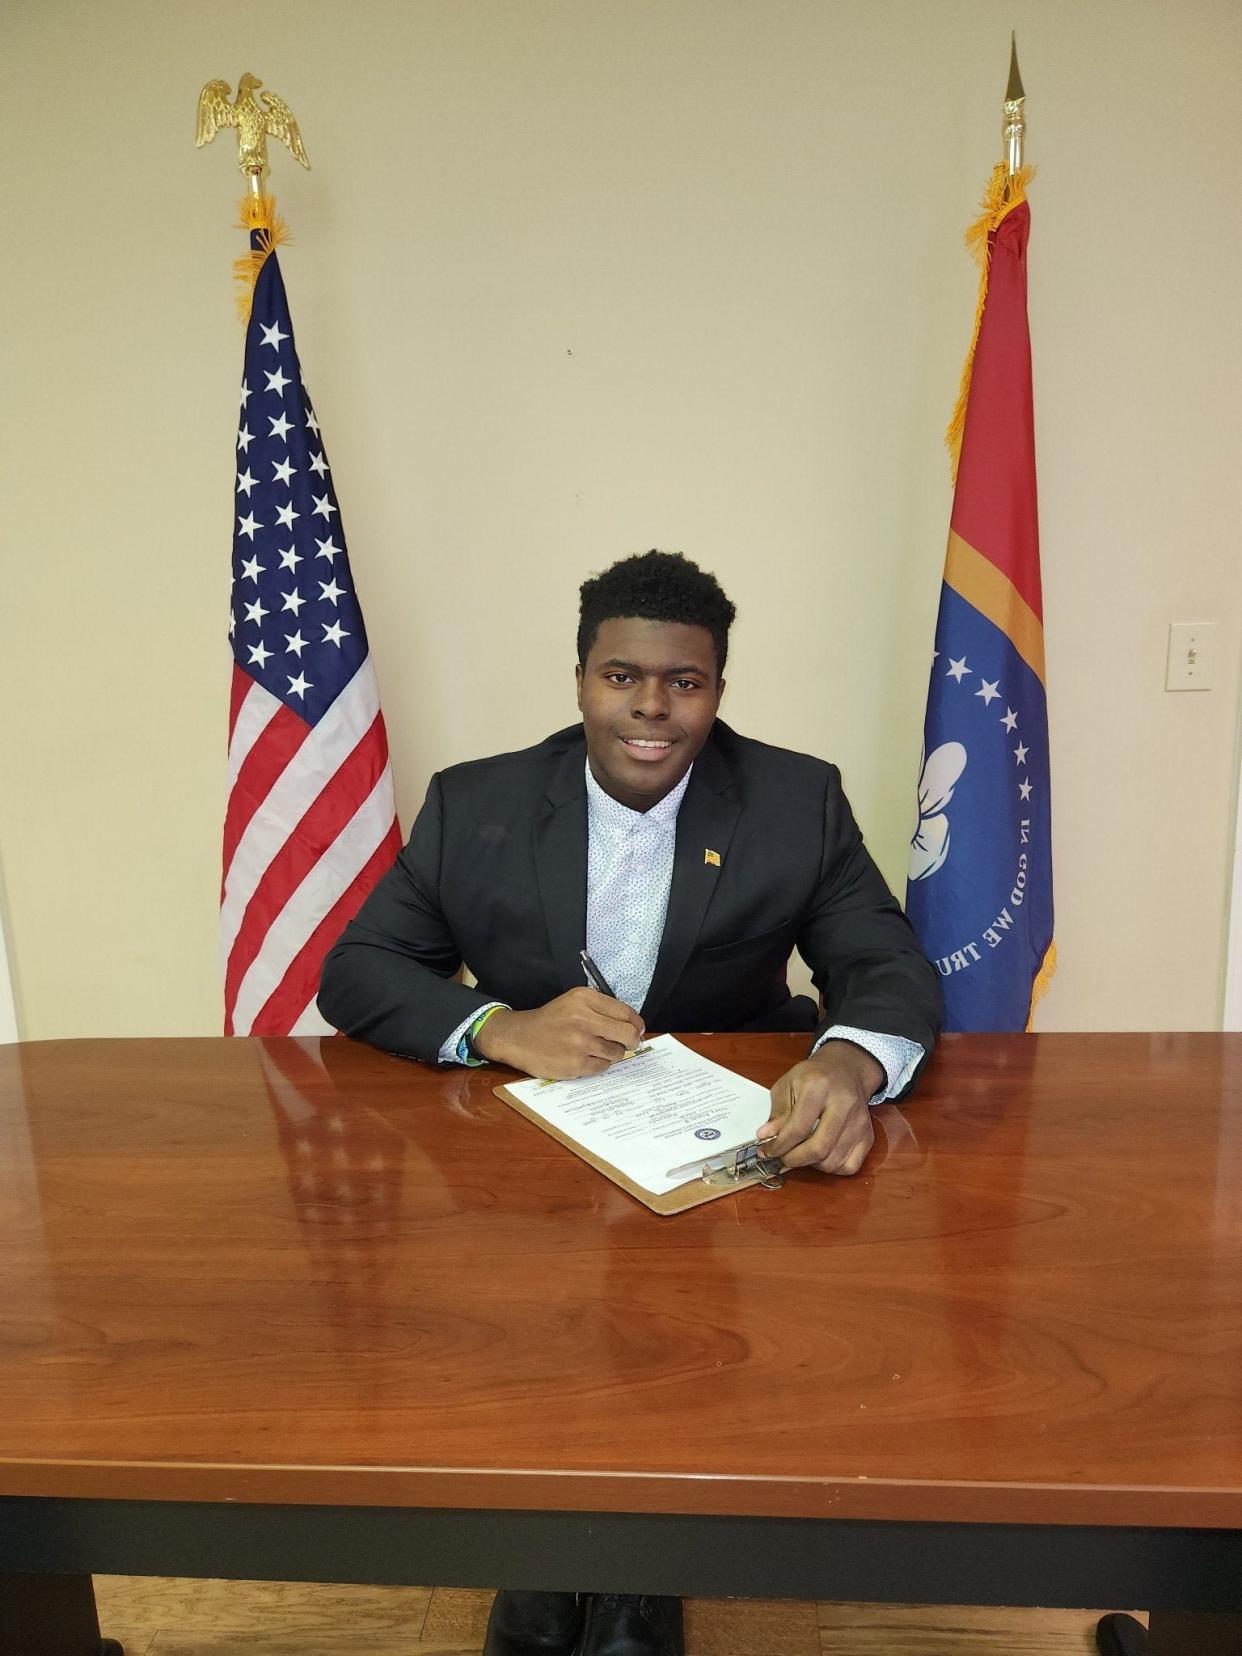 Terry Rogers, 18, is seeking the Democratic nomination for commissioner of agriculture after filing for the race Wenesday, Feb. 1, 2023 at the state Democratic Party headquarters in Jackson. He could face incumbent Republican Andy Gipson in the November election.